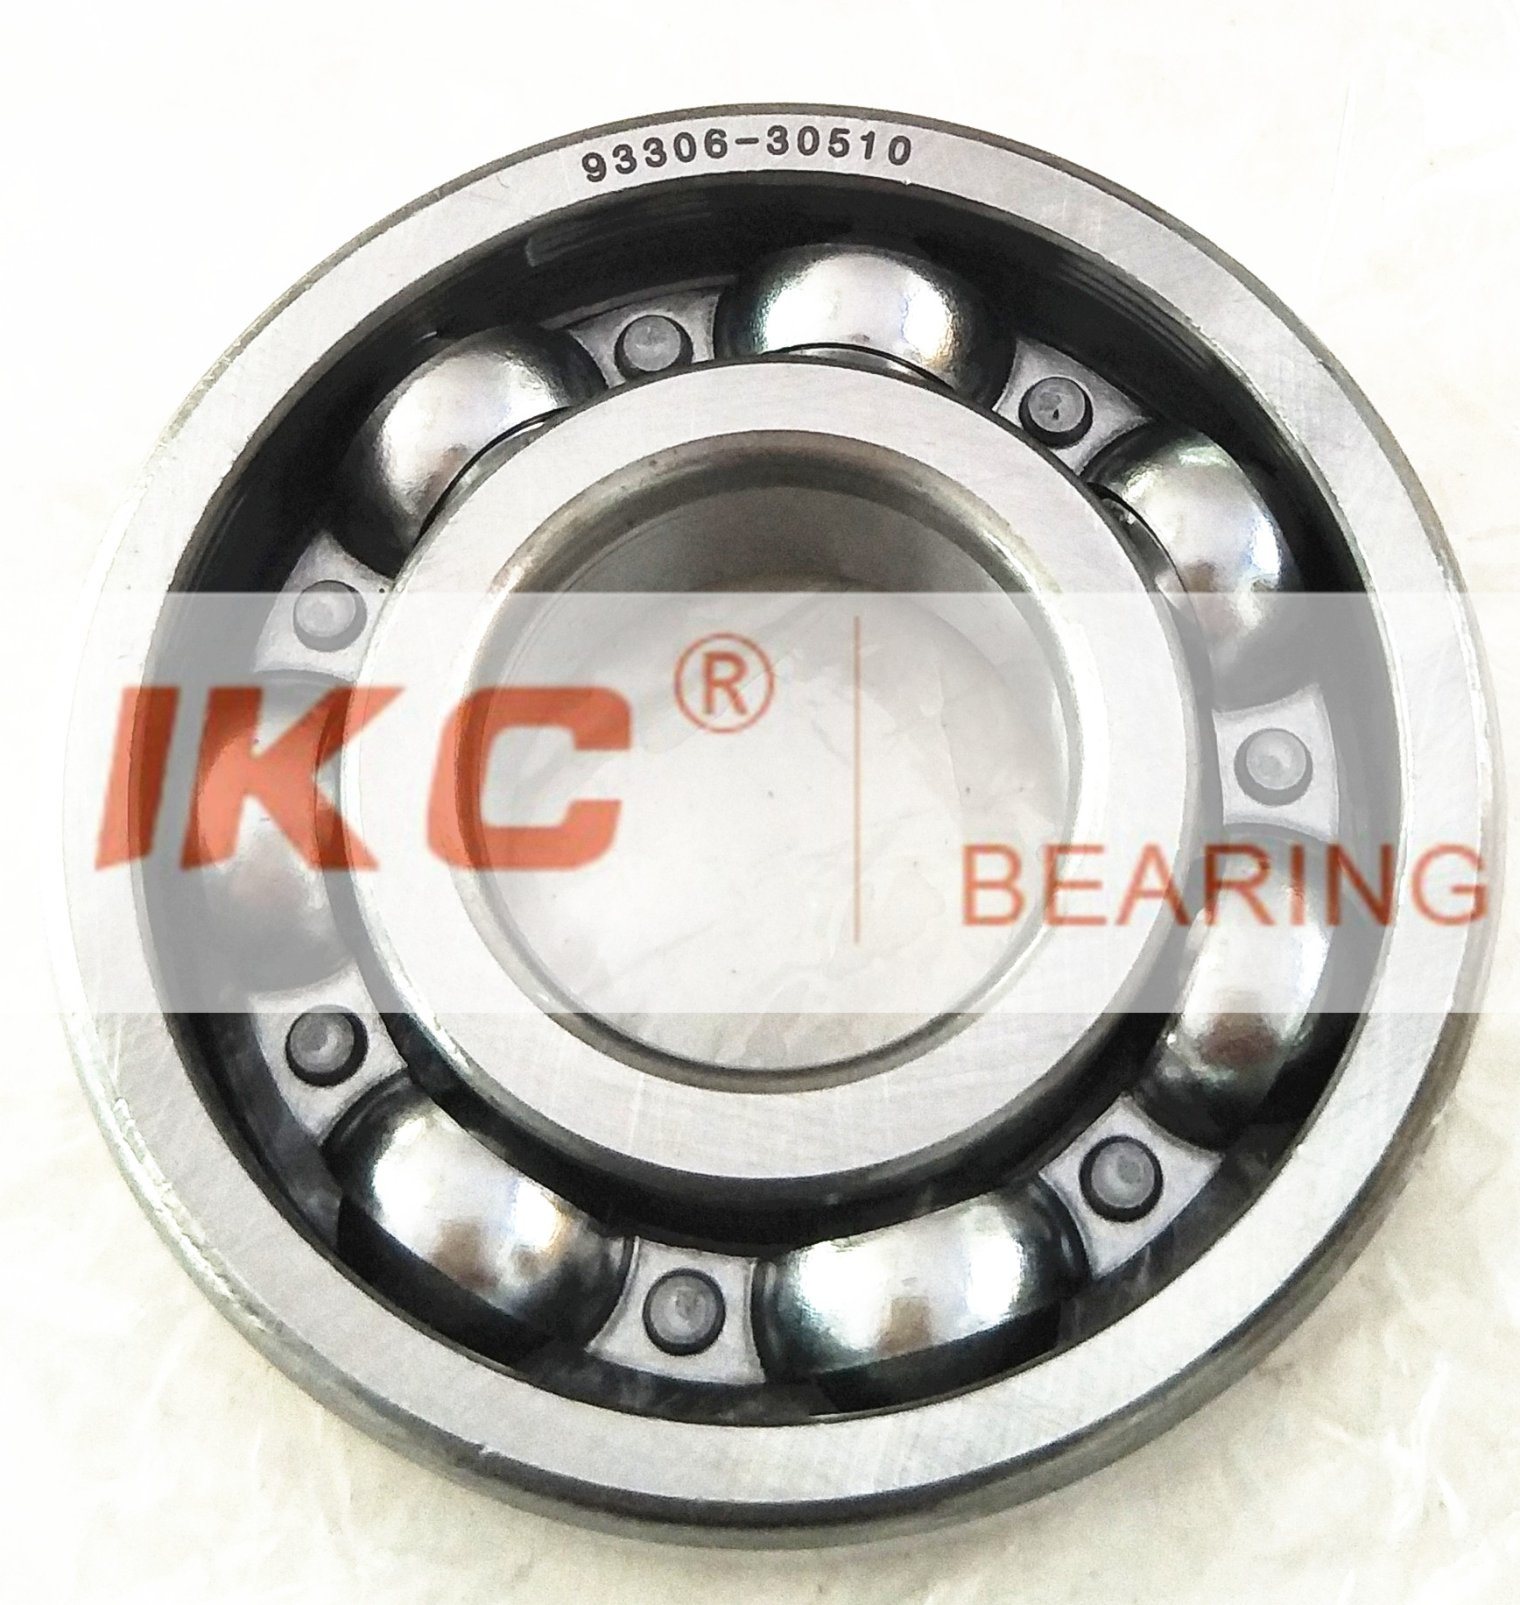 93306-30510 YAMAHA Outboard Spare Part Engine Bearing 9.9HP, 15HP, 20HP, 25HP, 30HP, 40HP, 48HP, 60HP, 70HP, 80HP, 100HP (93306-30510-00)